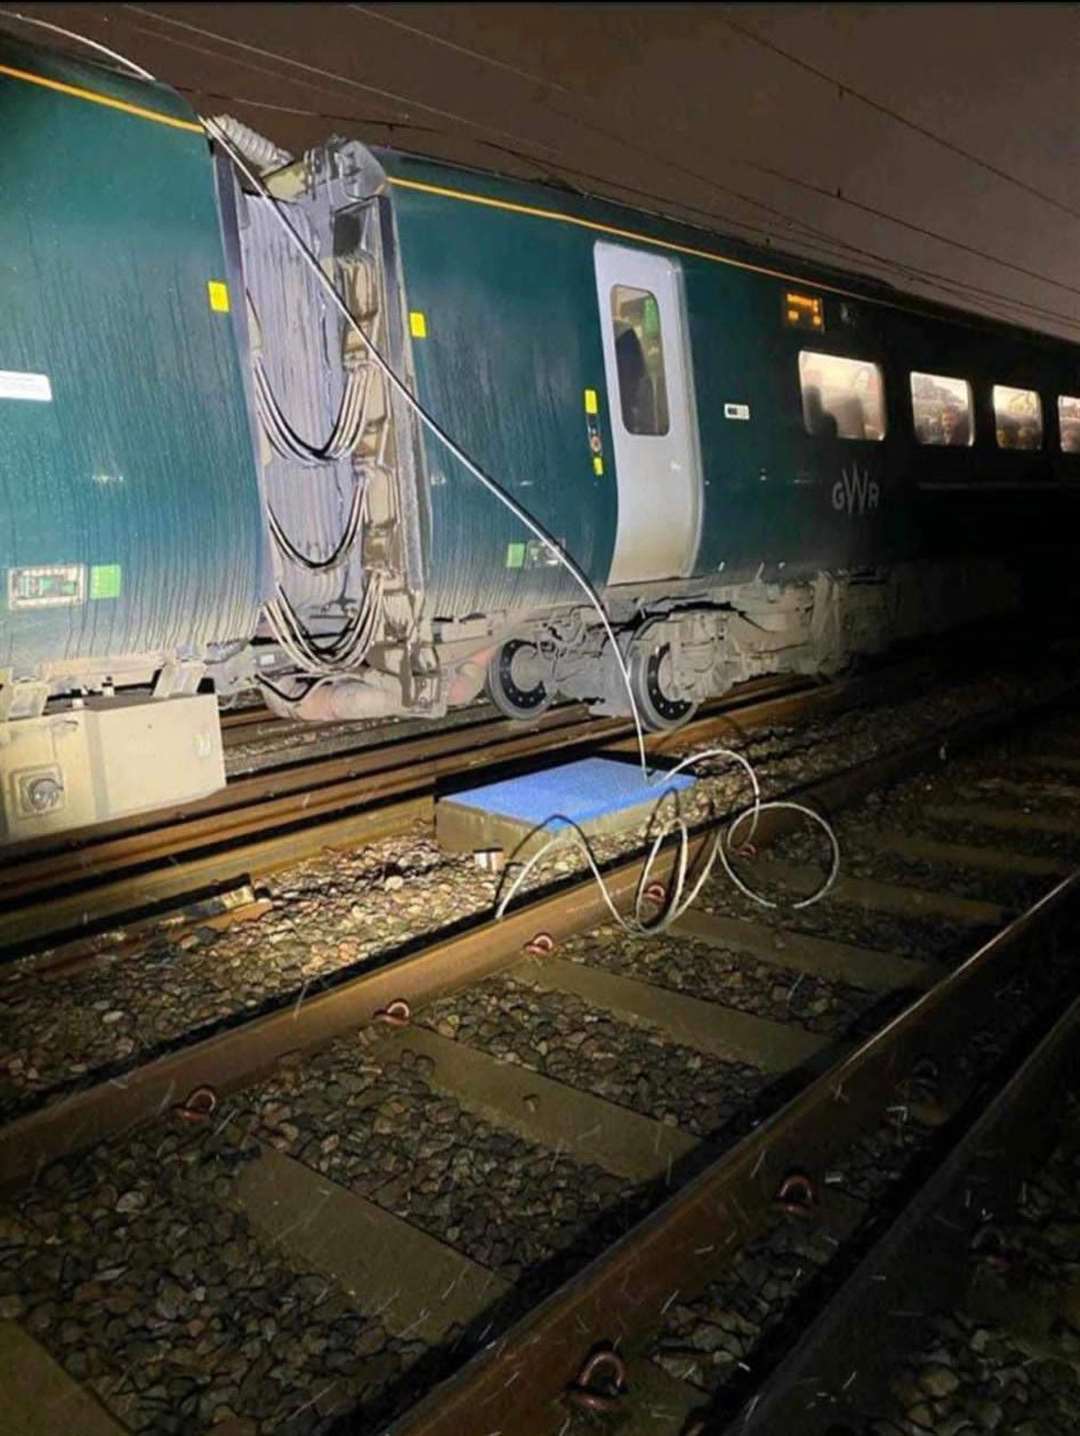 The train with damaged overhead electric cables (Aslef/PA)